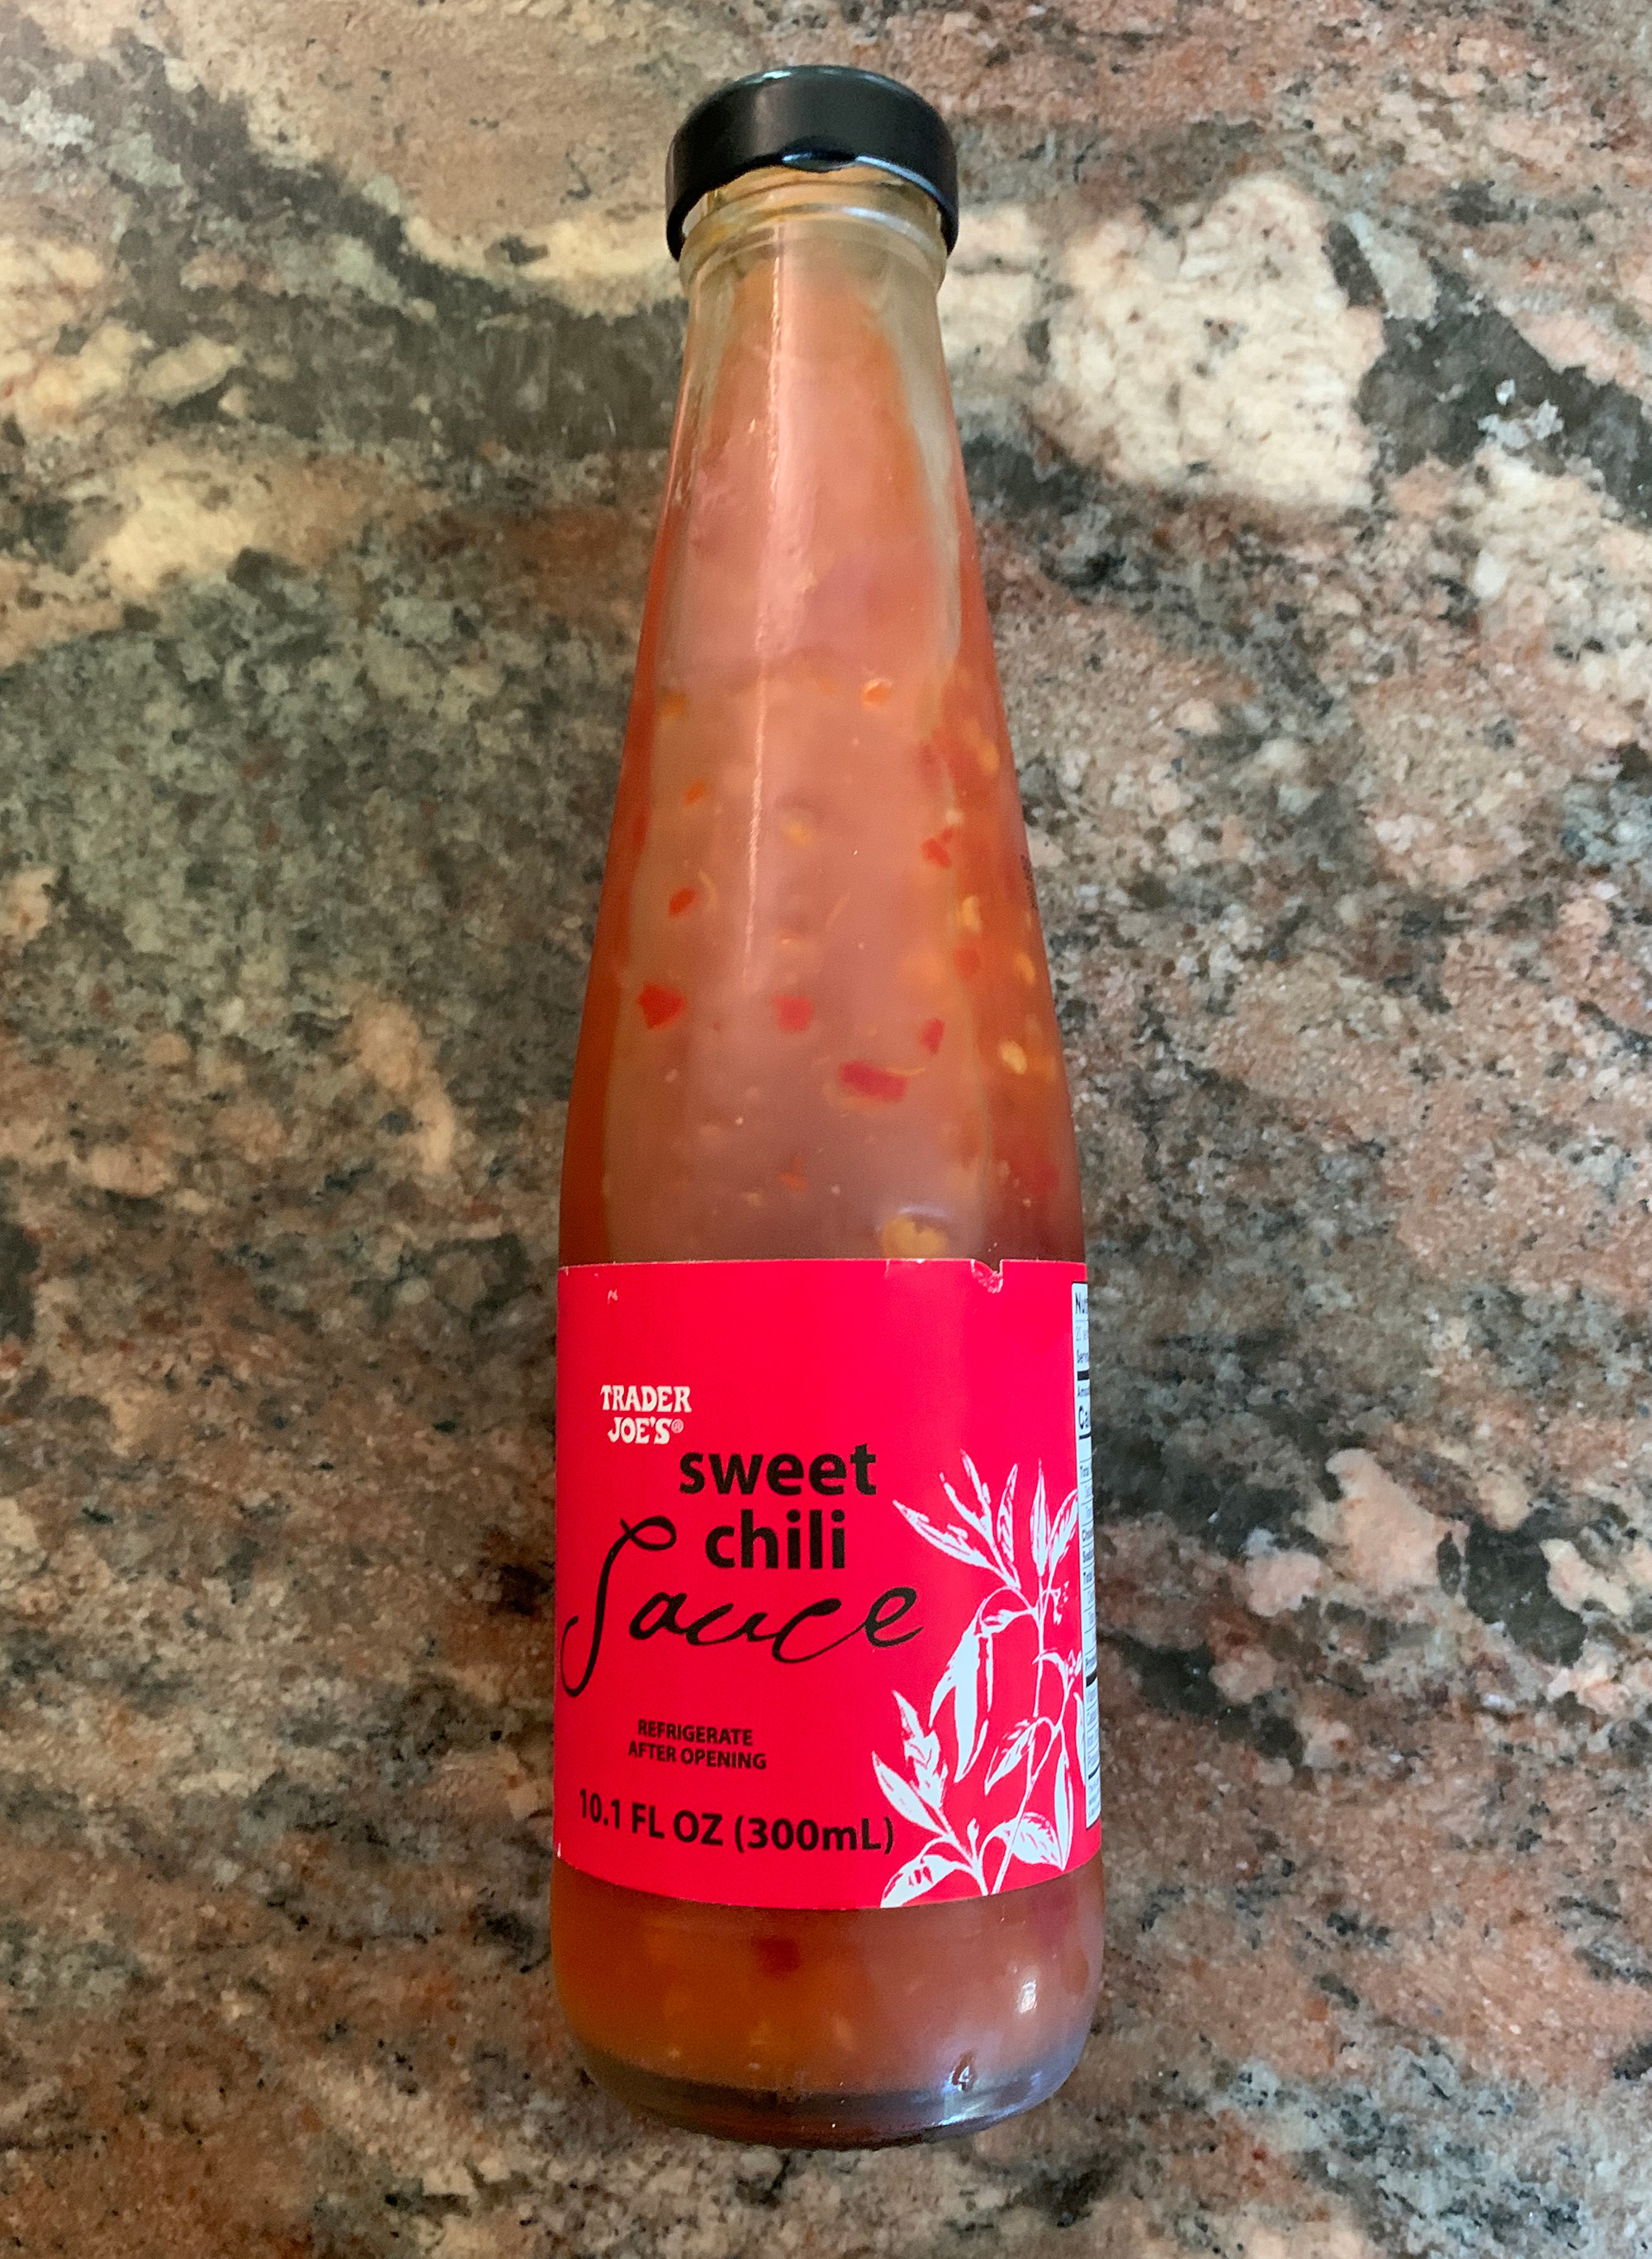 The Sweet chili Sauce bottle laying on a counter